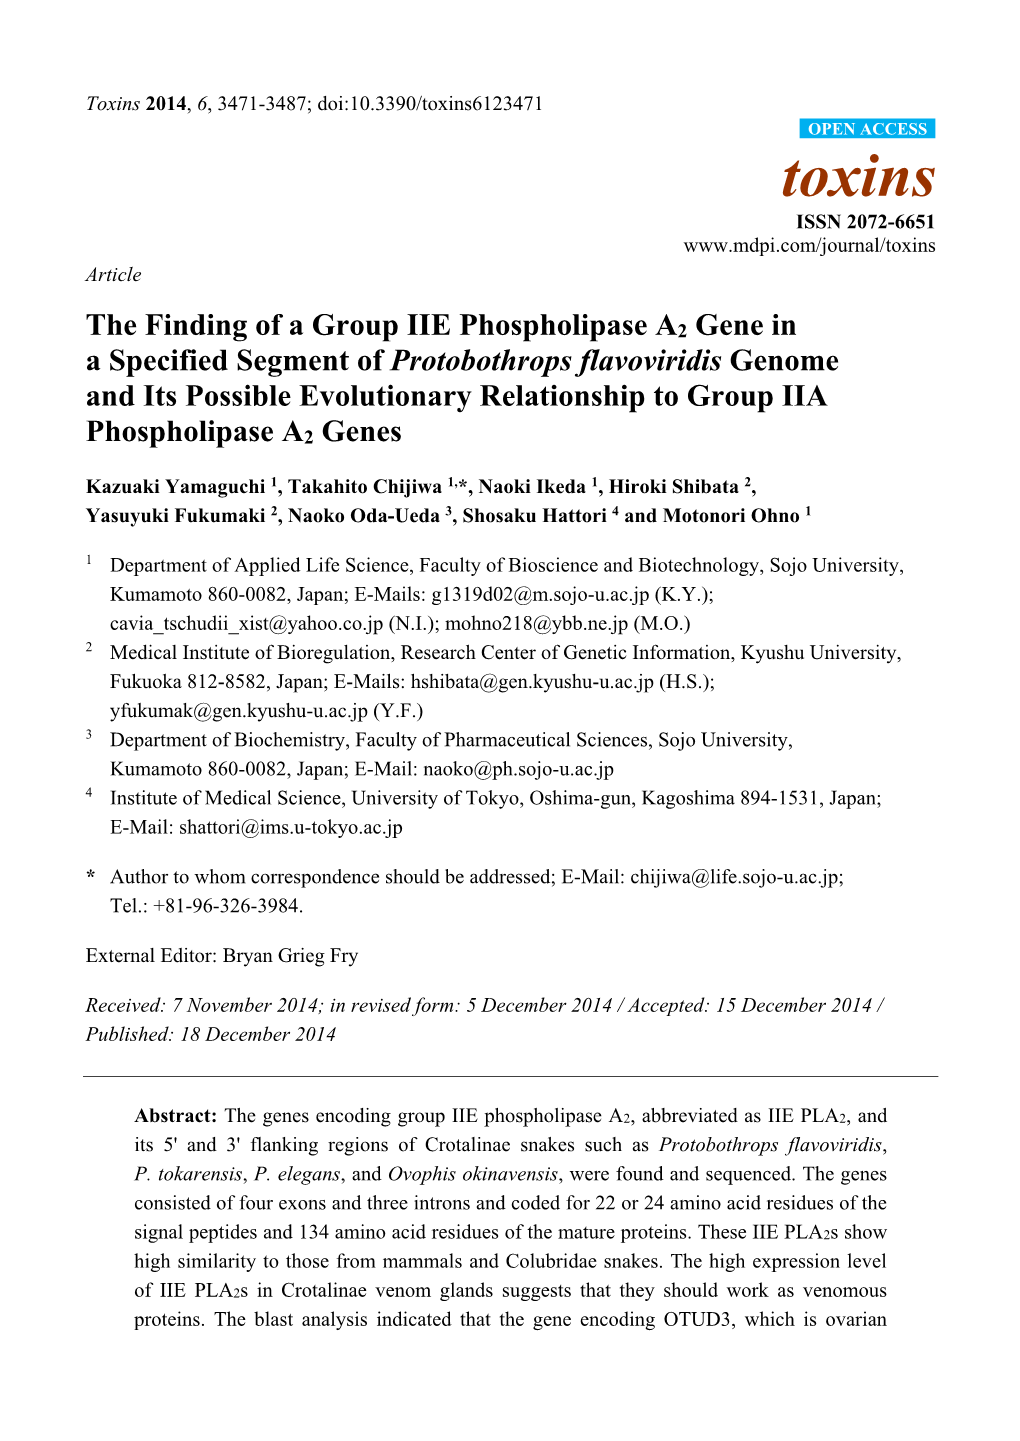 The Finding of a Group IIE Phospholipase A2 Gene in a Specified Segment of Protobothrops Flavoviridis Genome and Its Possible Ev